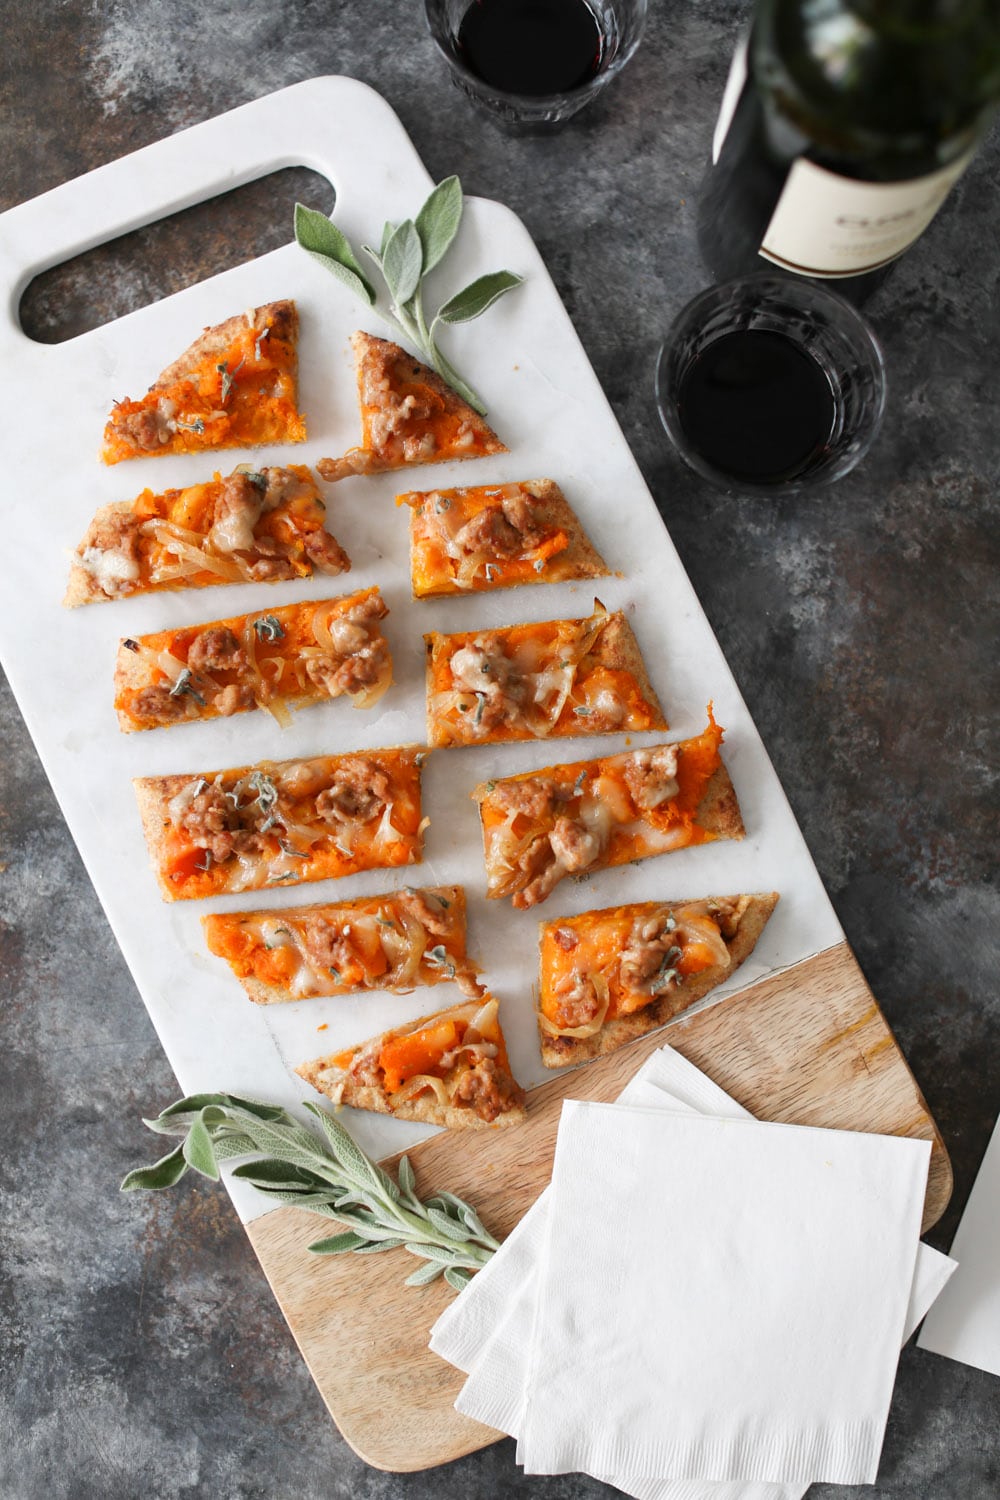 Butternut Squash Flatbread with Sausage and Caramelized Onions